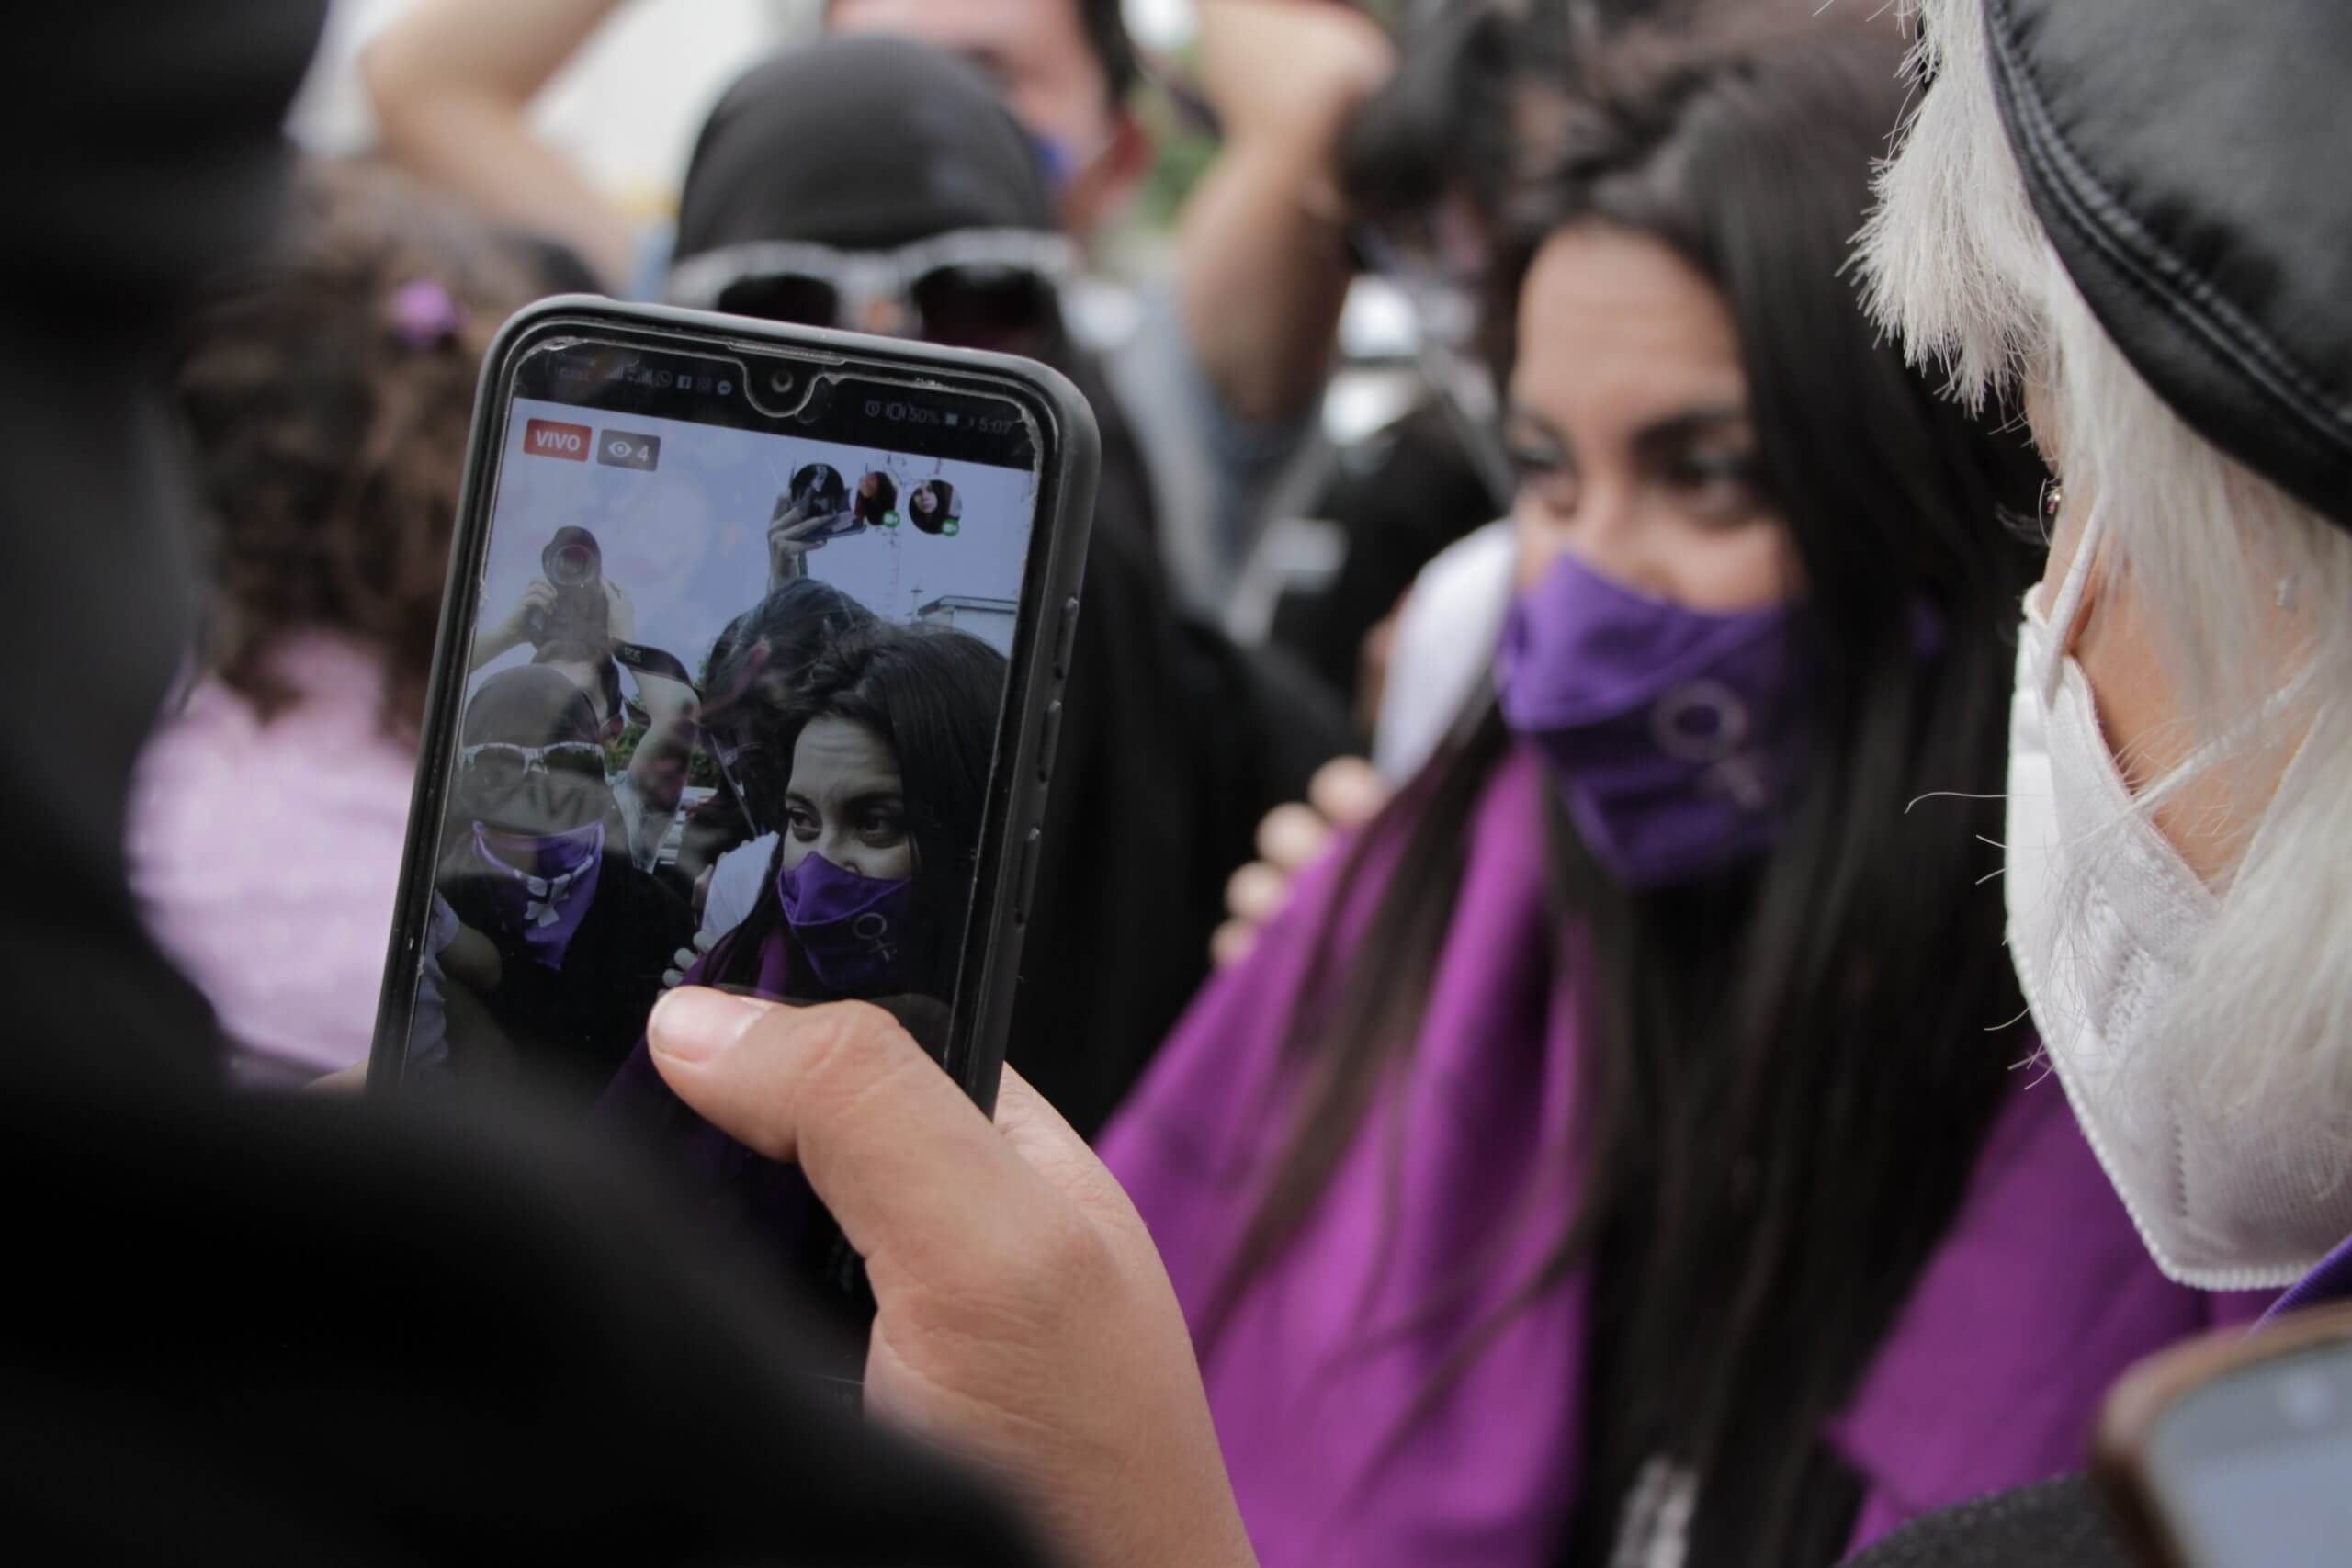 A phone recording Olimpia Coral and others outside the Chamber of Deputies before the Olimpia Law's approval. Olimpia wears a purple mask and a purple flag over her shoulders.